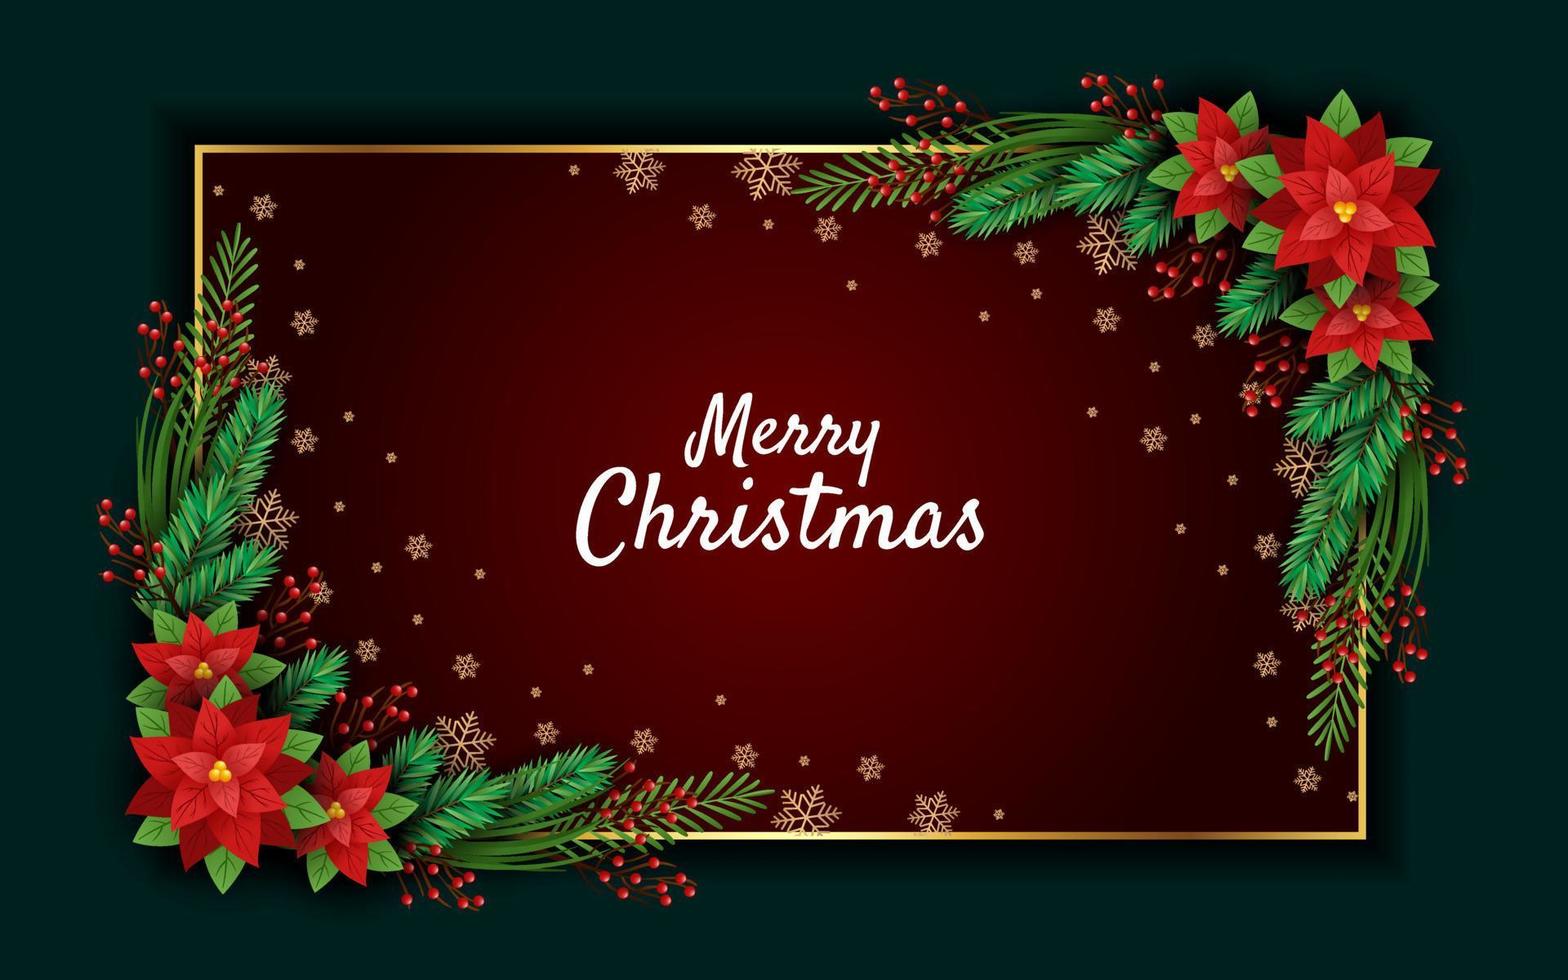 Christmas background realistic frame with pine leaves decoration vector